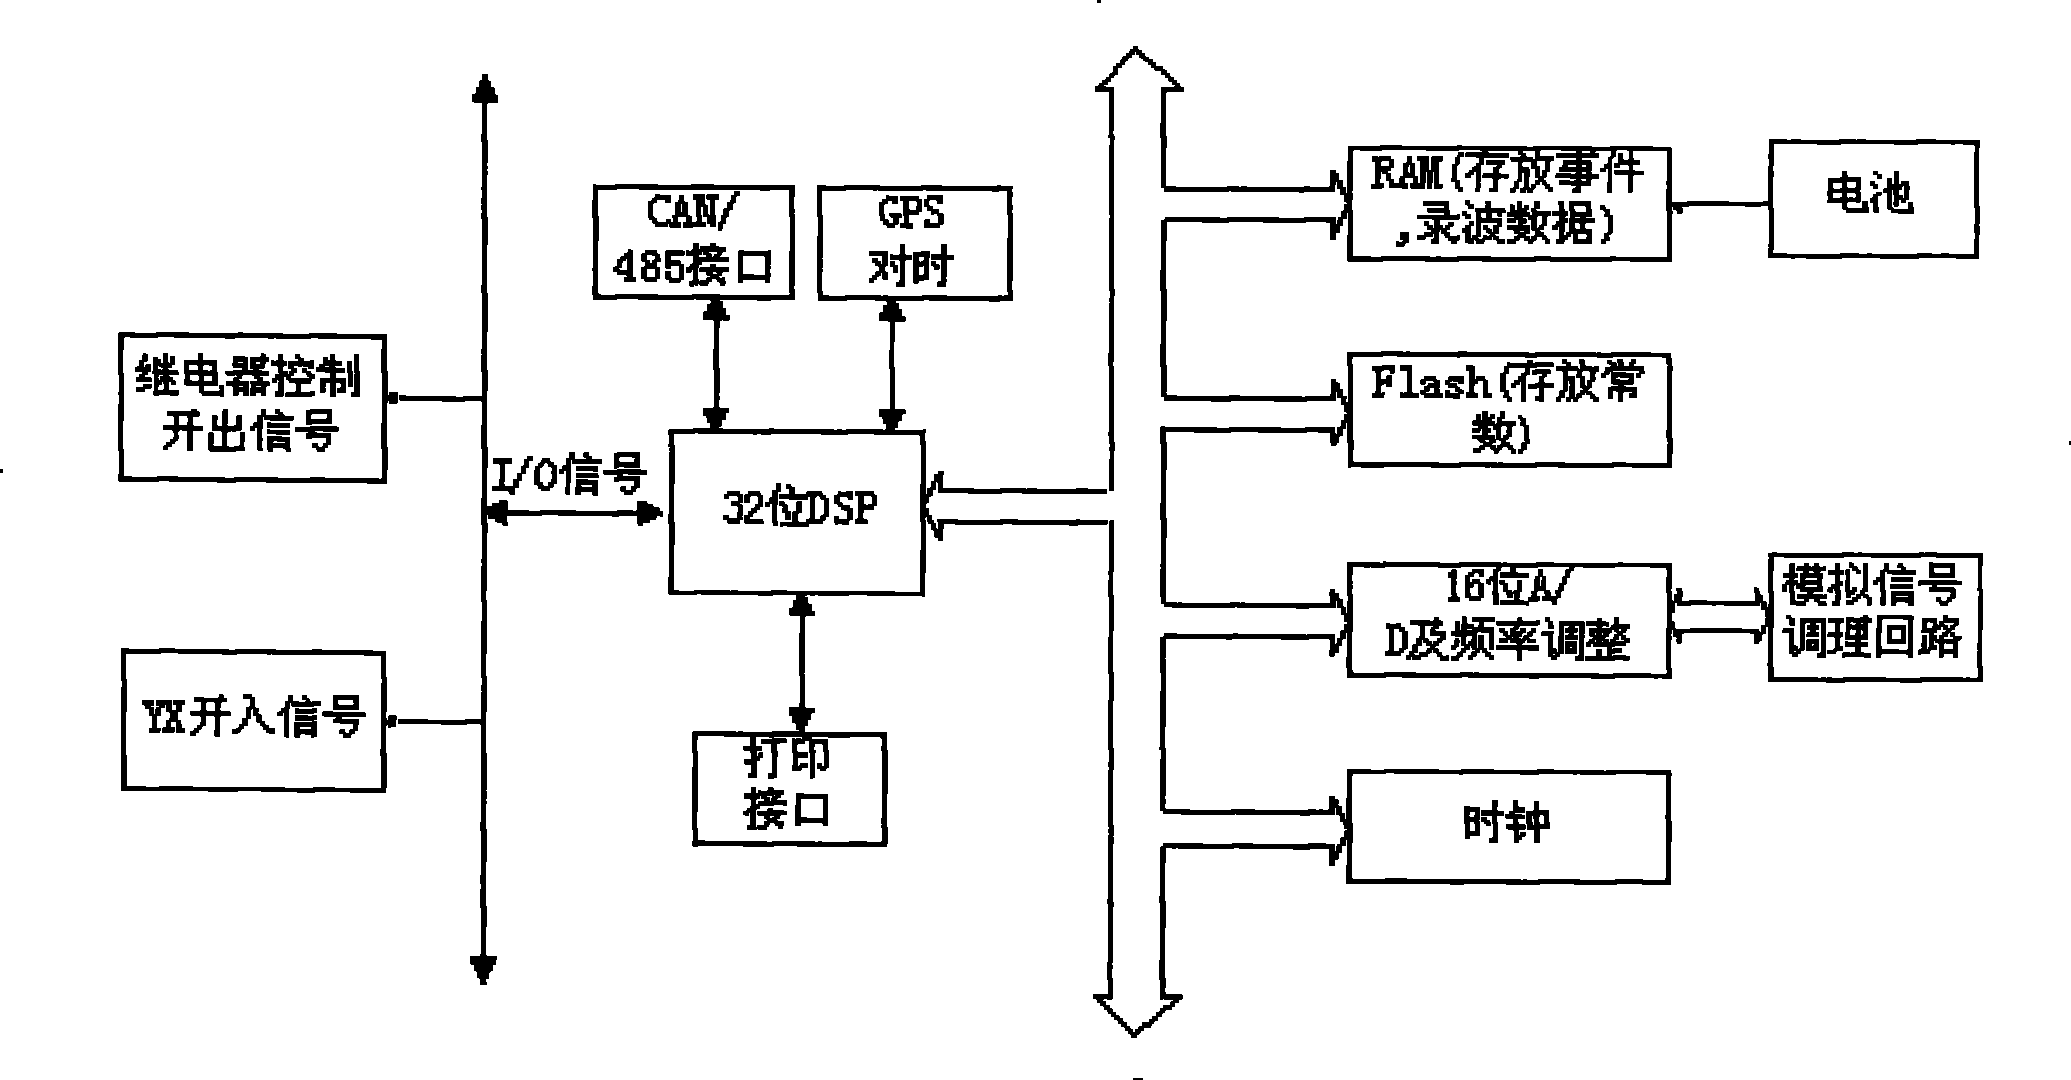 Digital synthesis protection observe and control unit of multipath operation mode